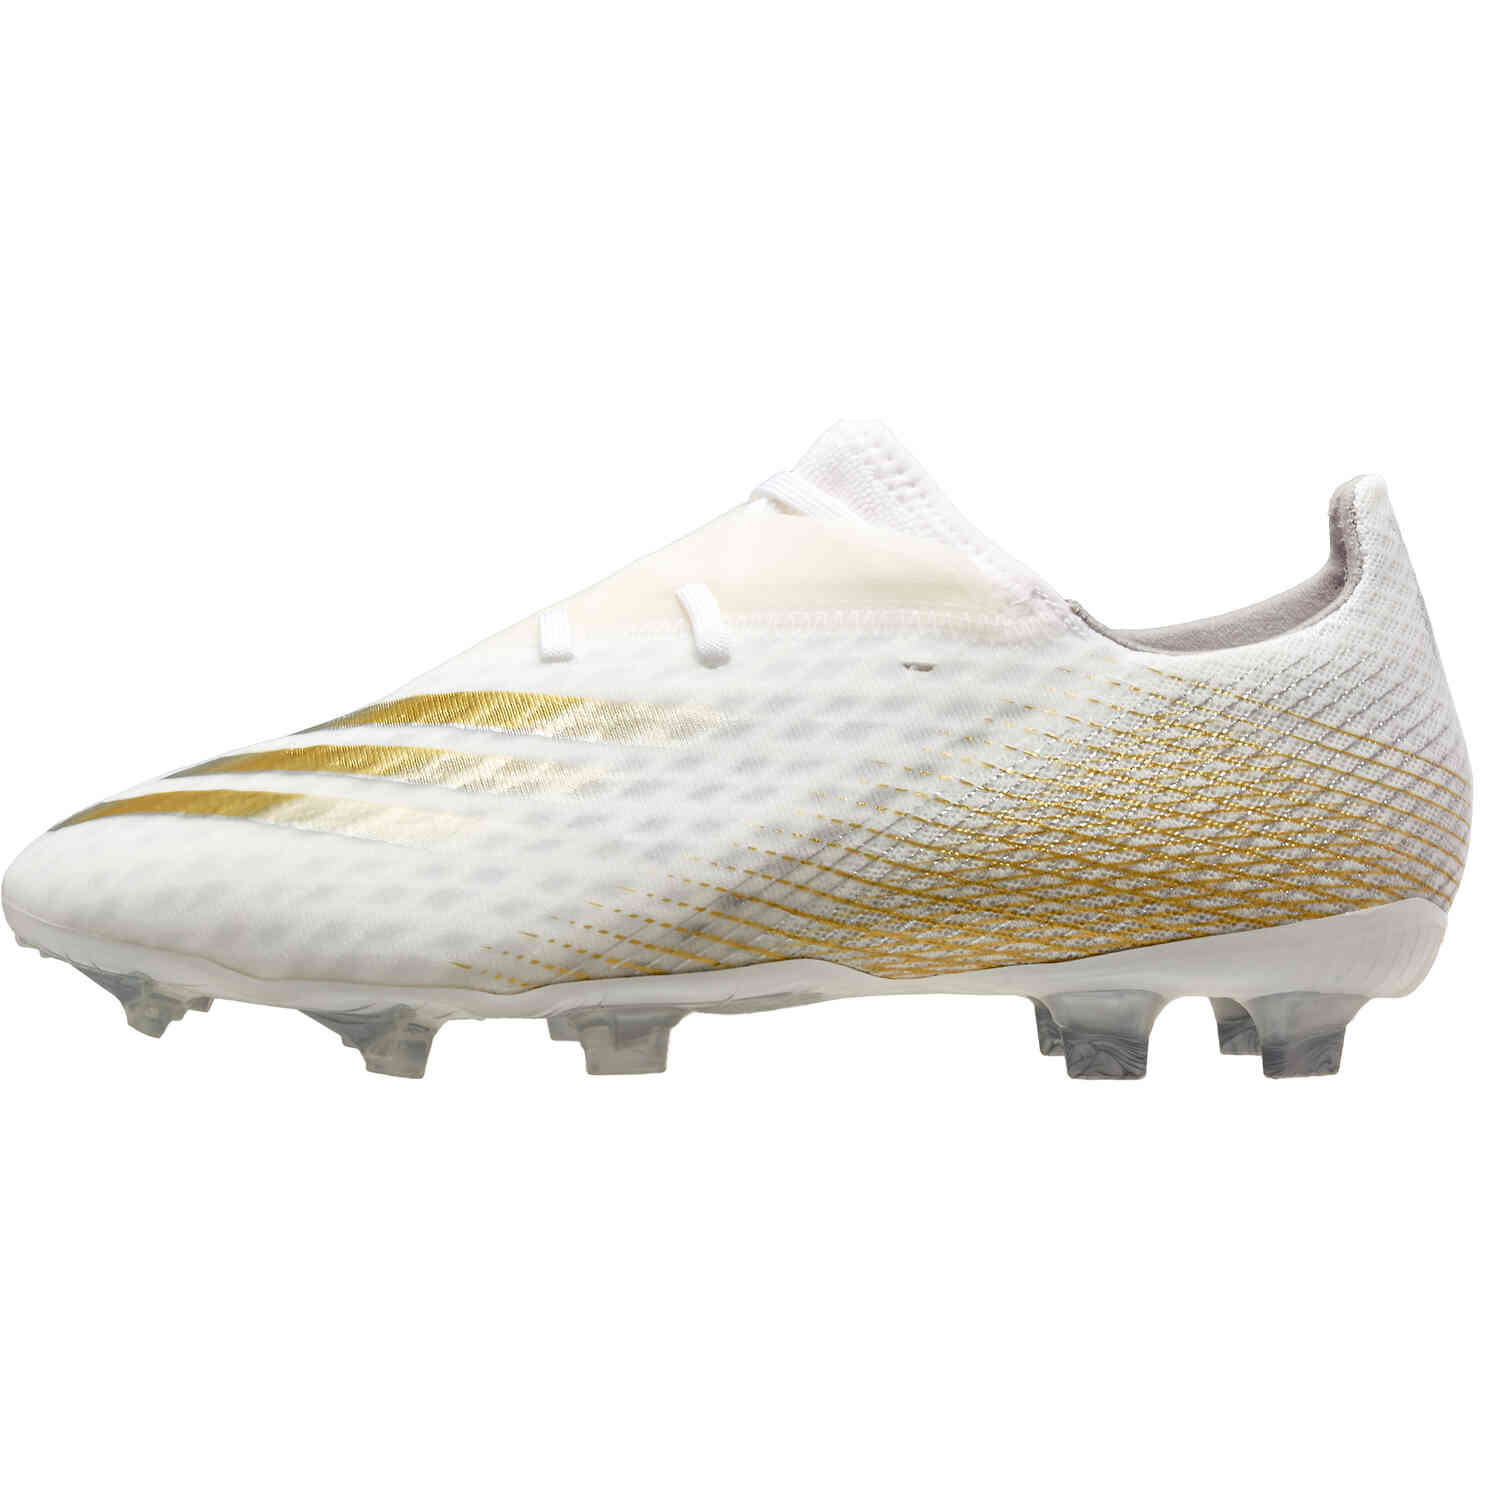 adidas X Ghosted.2 FG - InFlight - SoccerPro